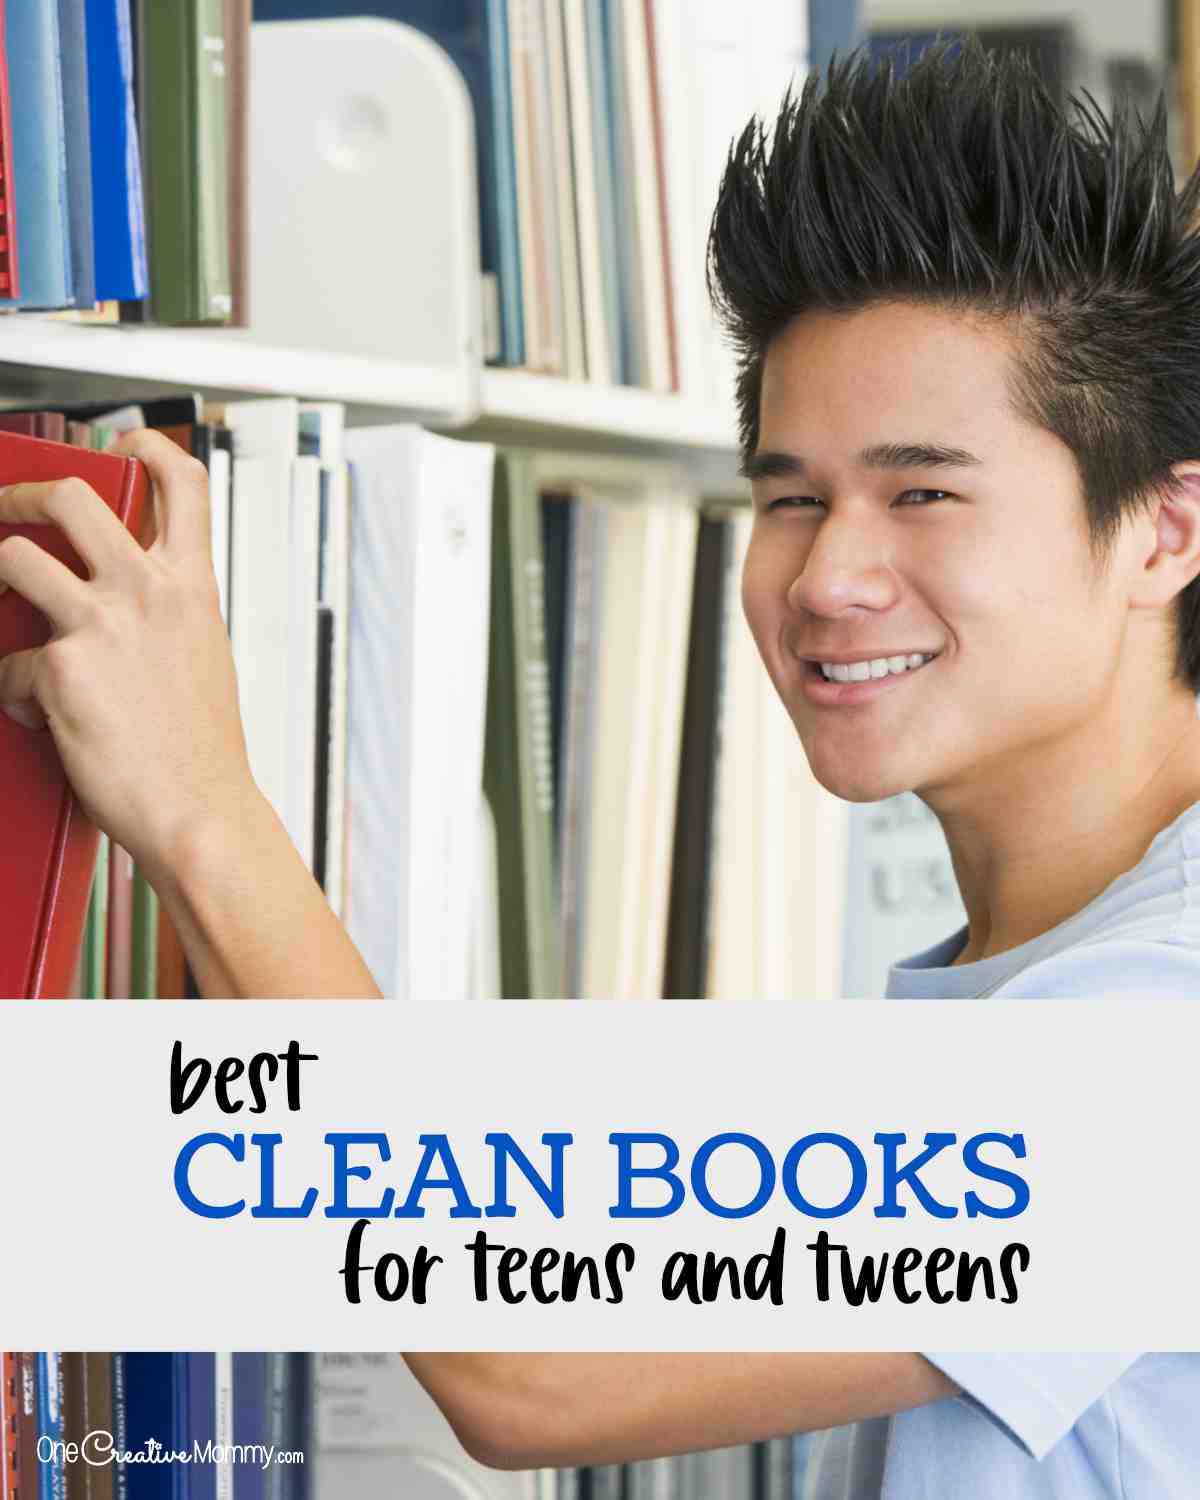 Smiling teenage boy selecting a book from a library shelf